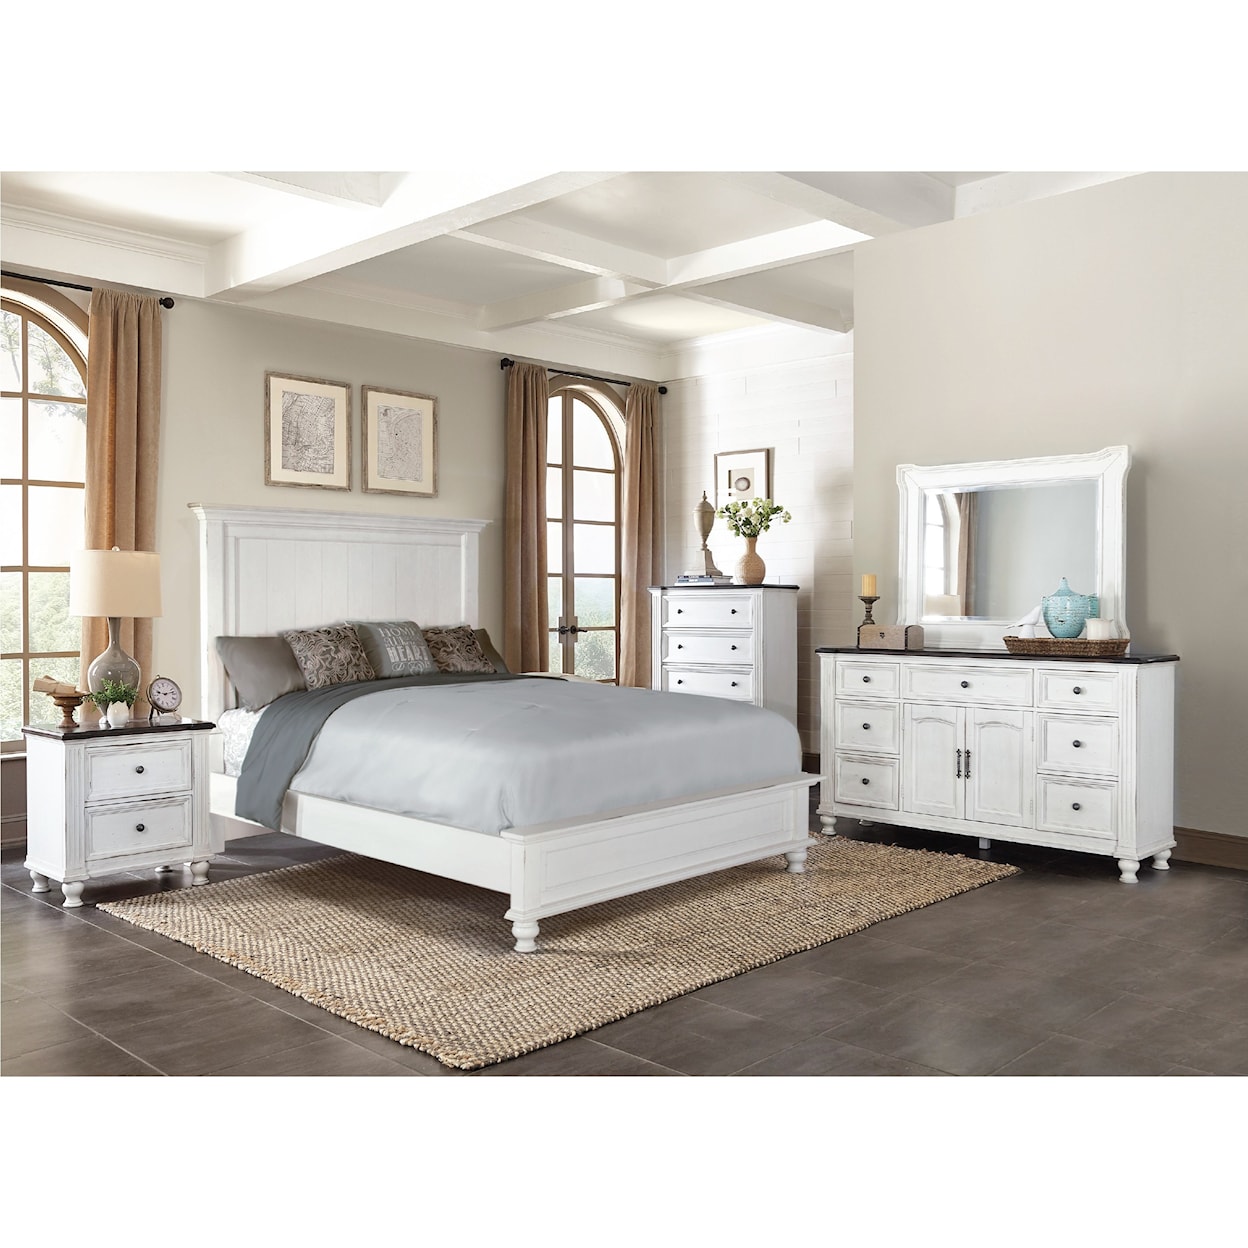 Sunny Designs Carriage House King Bedroom Group